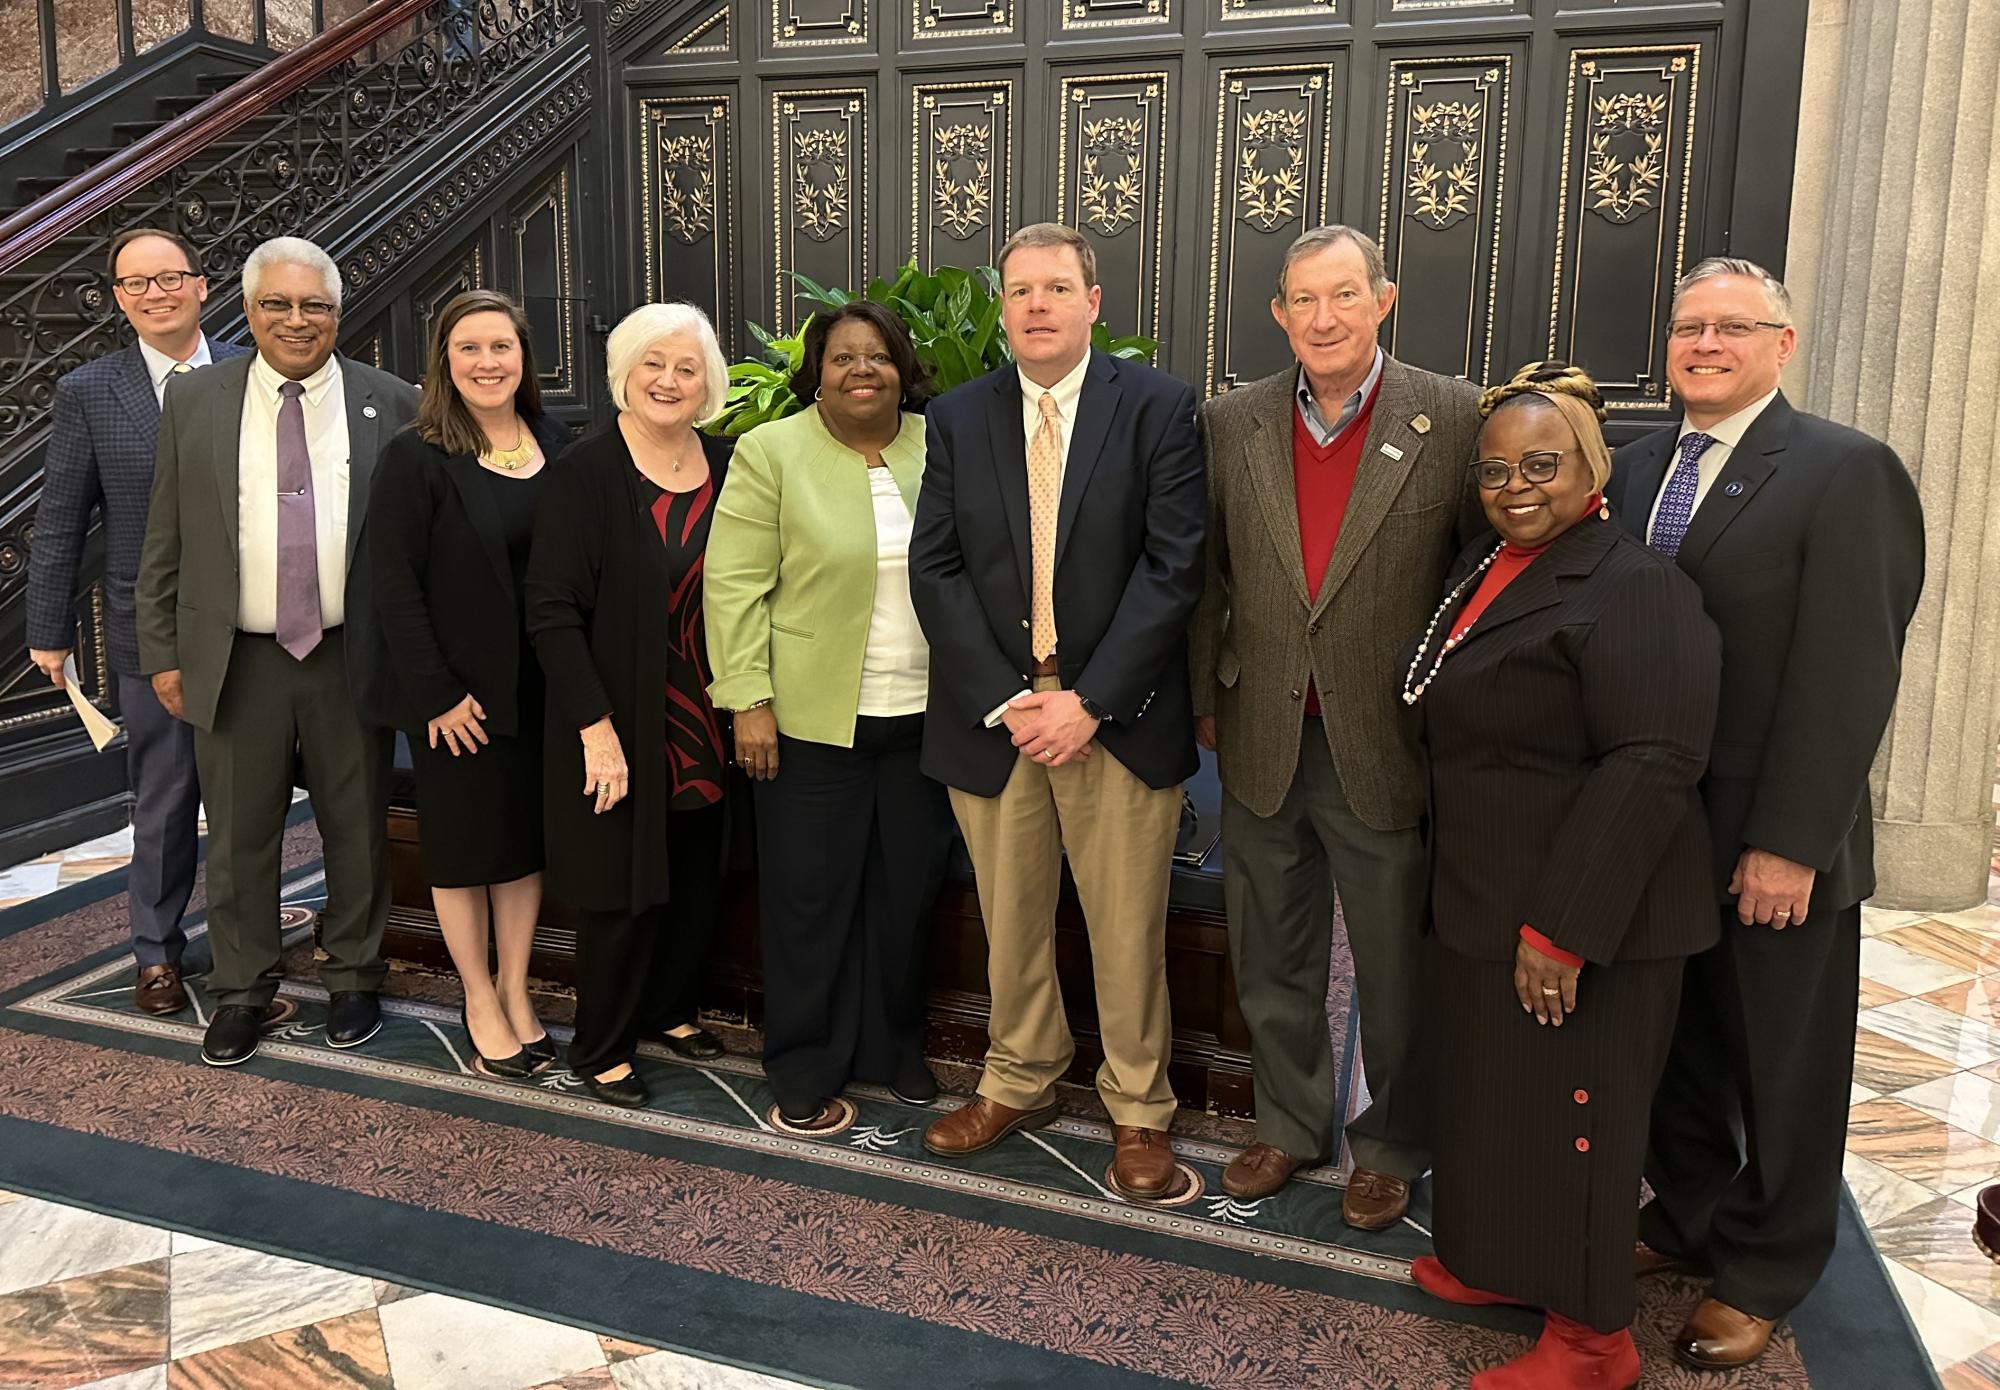 Representatives from the S.C. Association of Auditors, Treasurers & Tax Collectors, including SCAC Board Member and Anderson County Treasurer Jason Phillips, visited the State House this week.